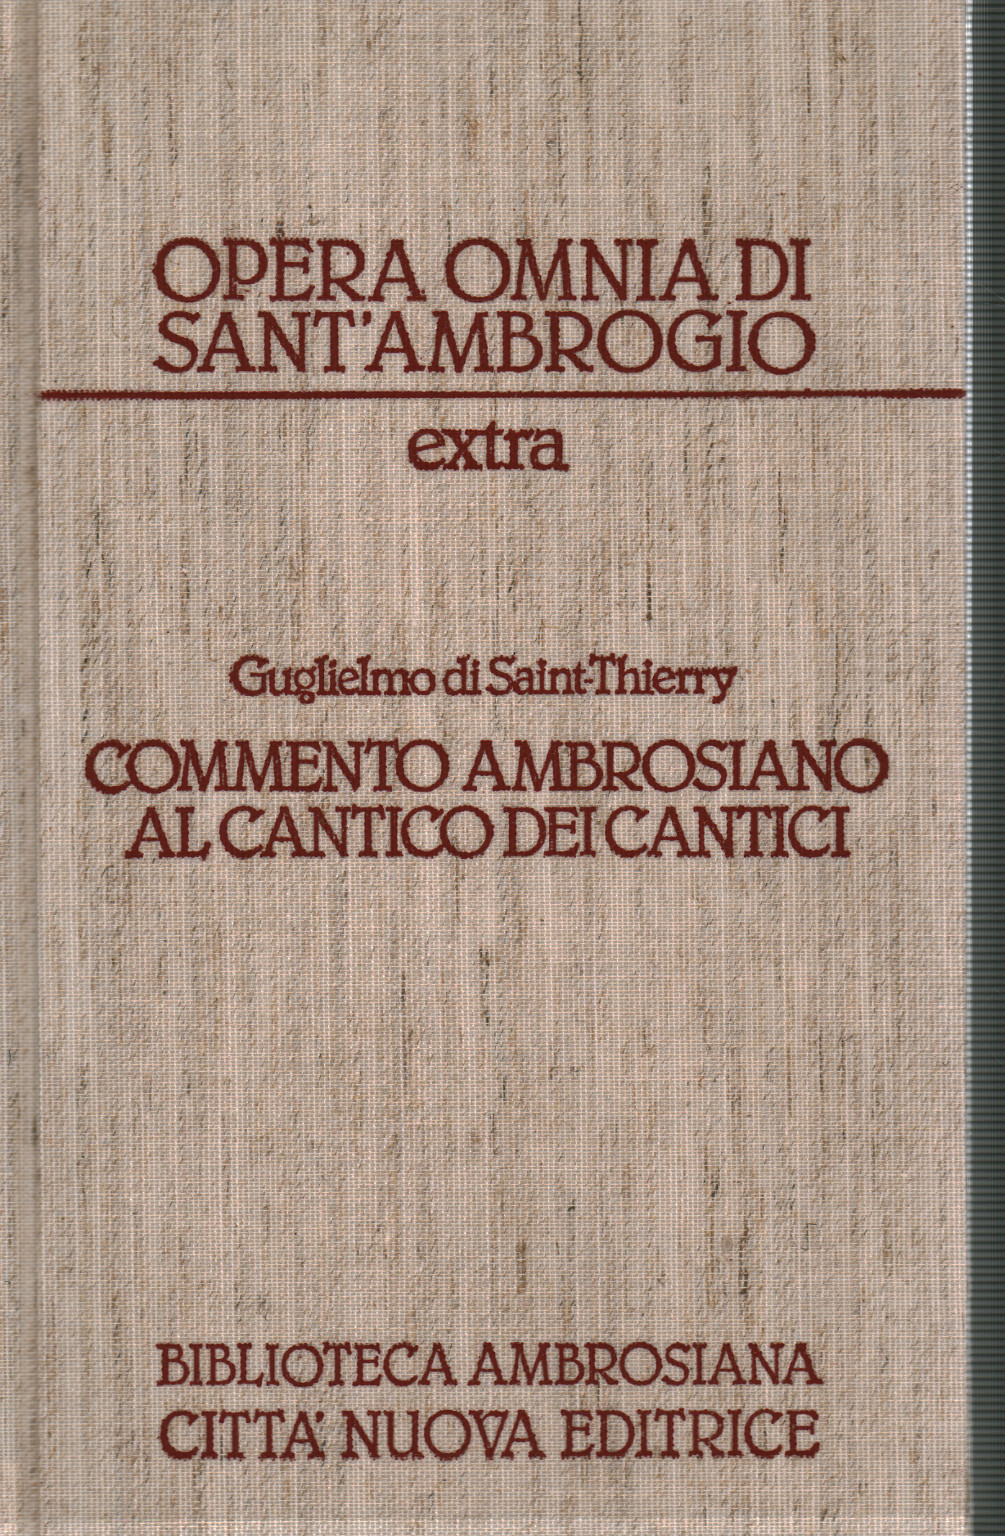 William of Sain-Thierry Ambrosian commentary on c, s.a.